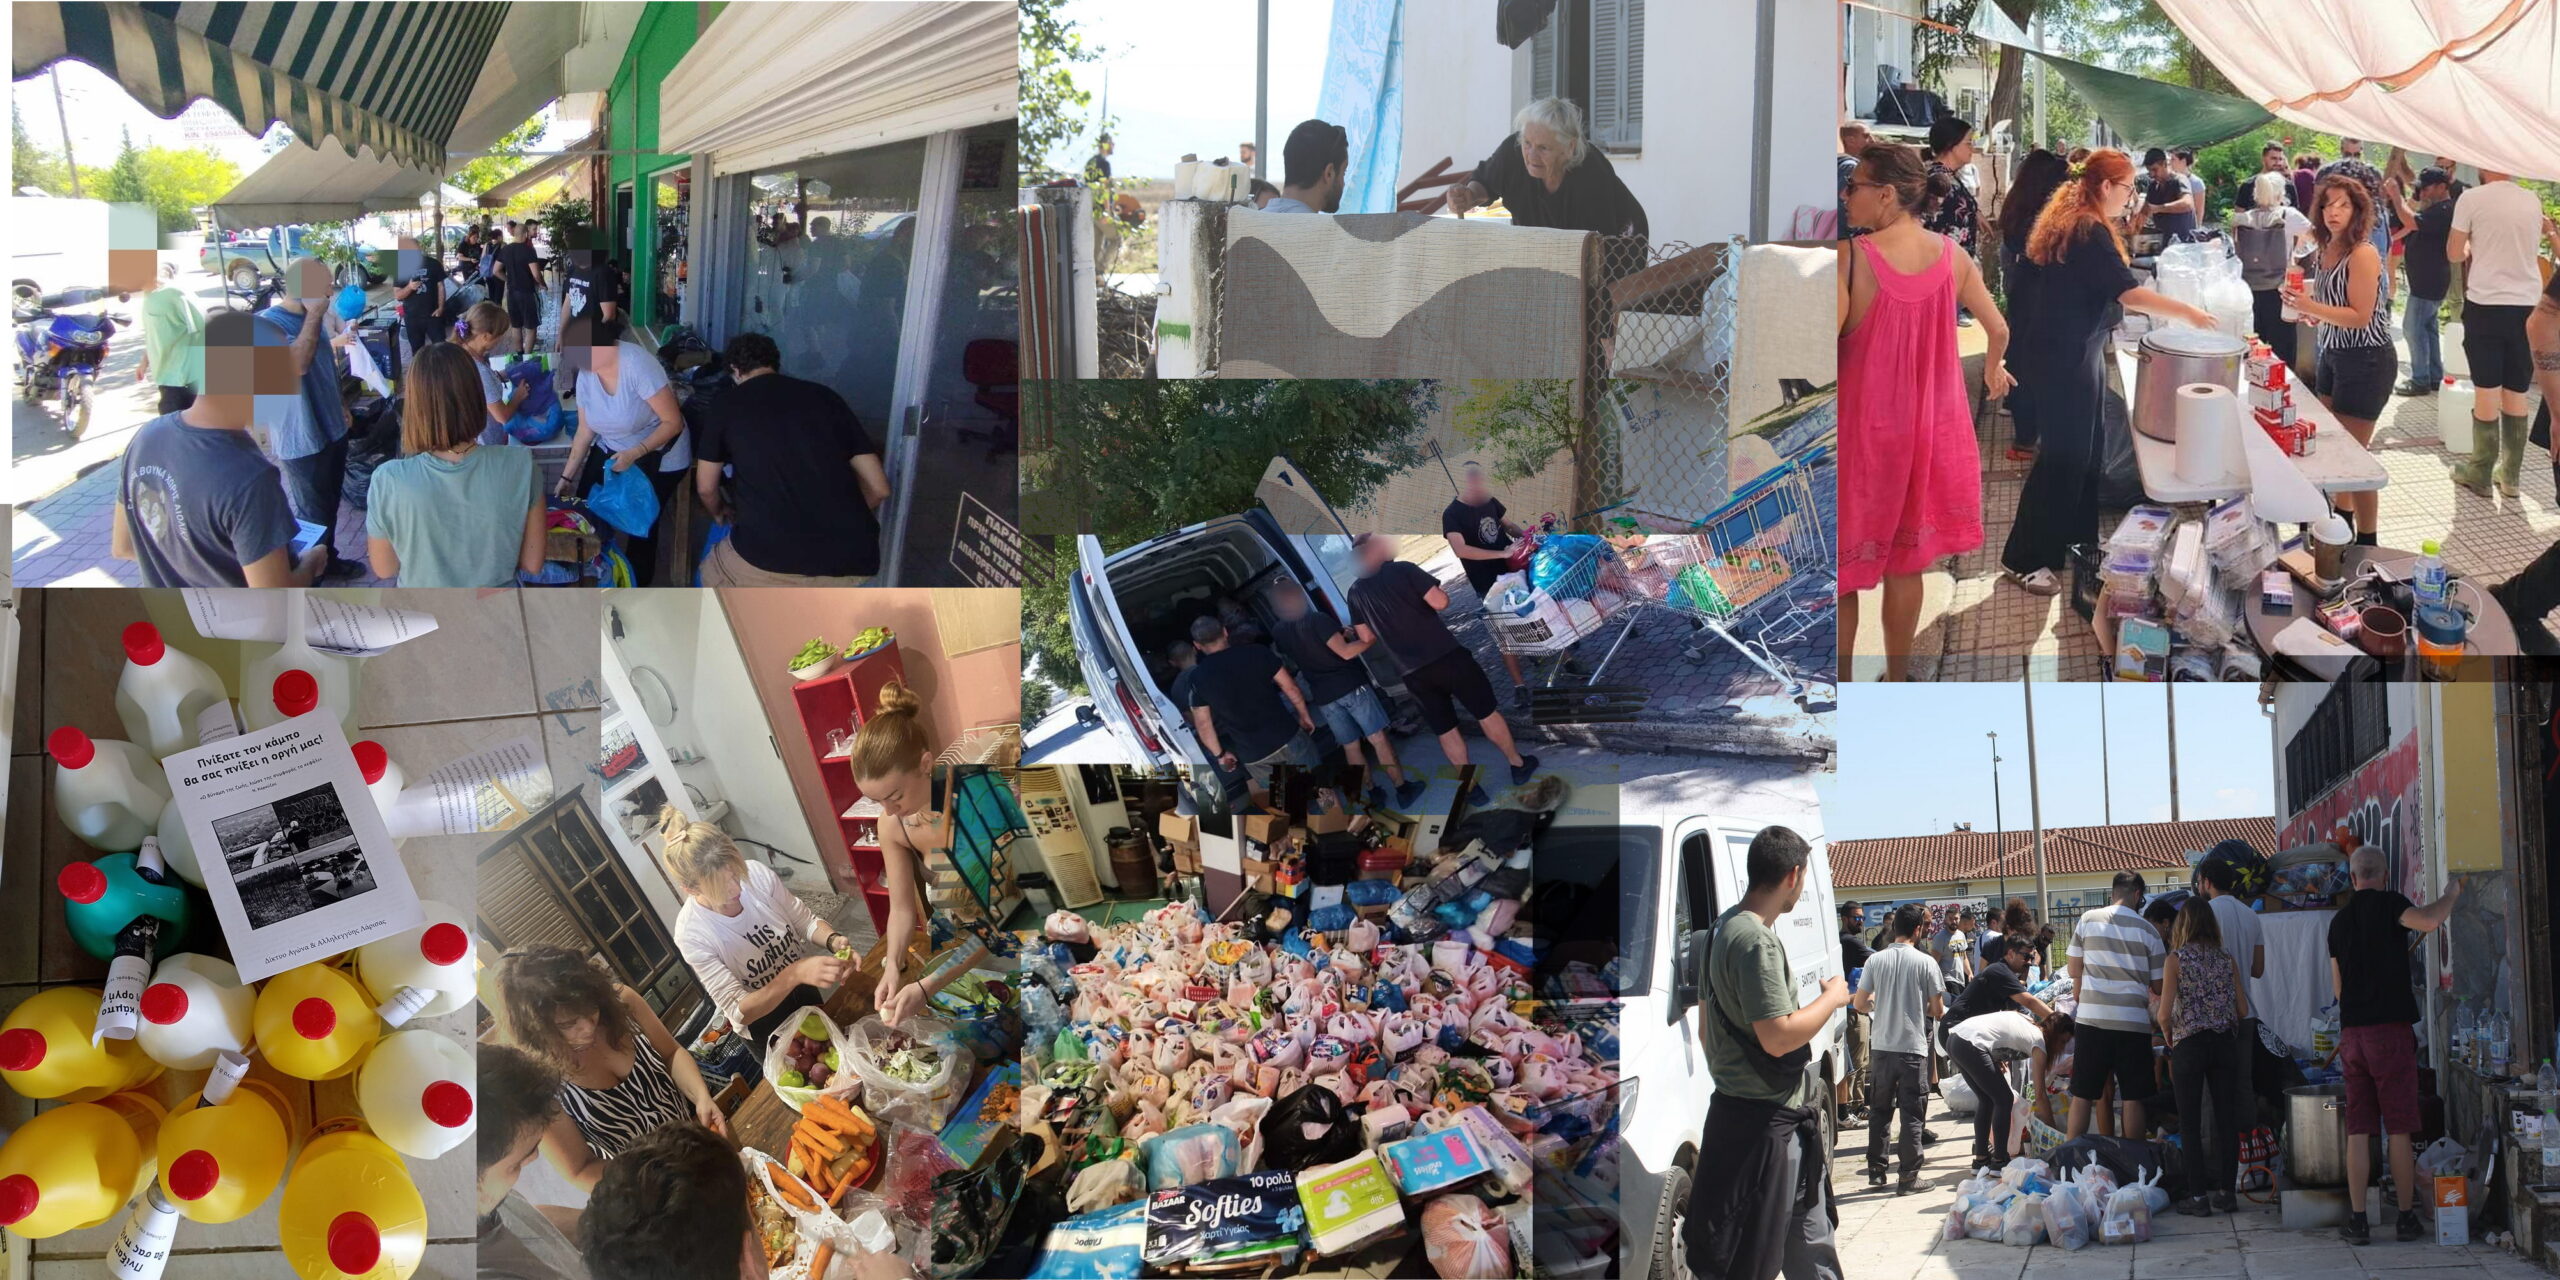 A collage of photos depicting self-organization and mutual aid among local residents and volunteers during the recent deadly floods in Central Greece.